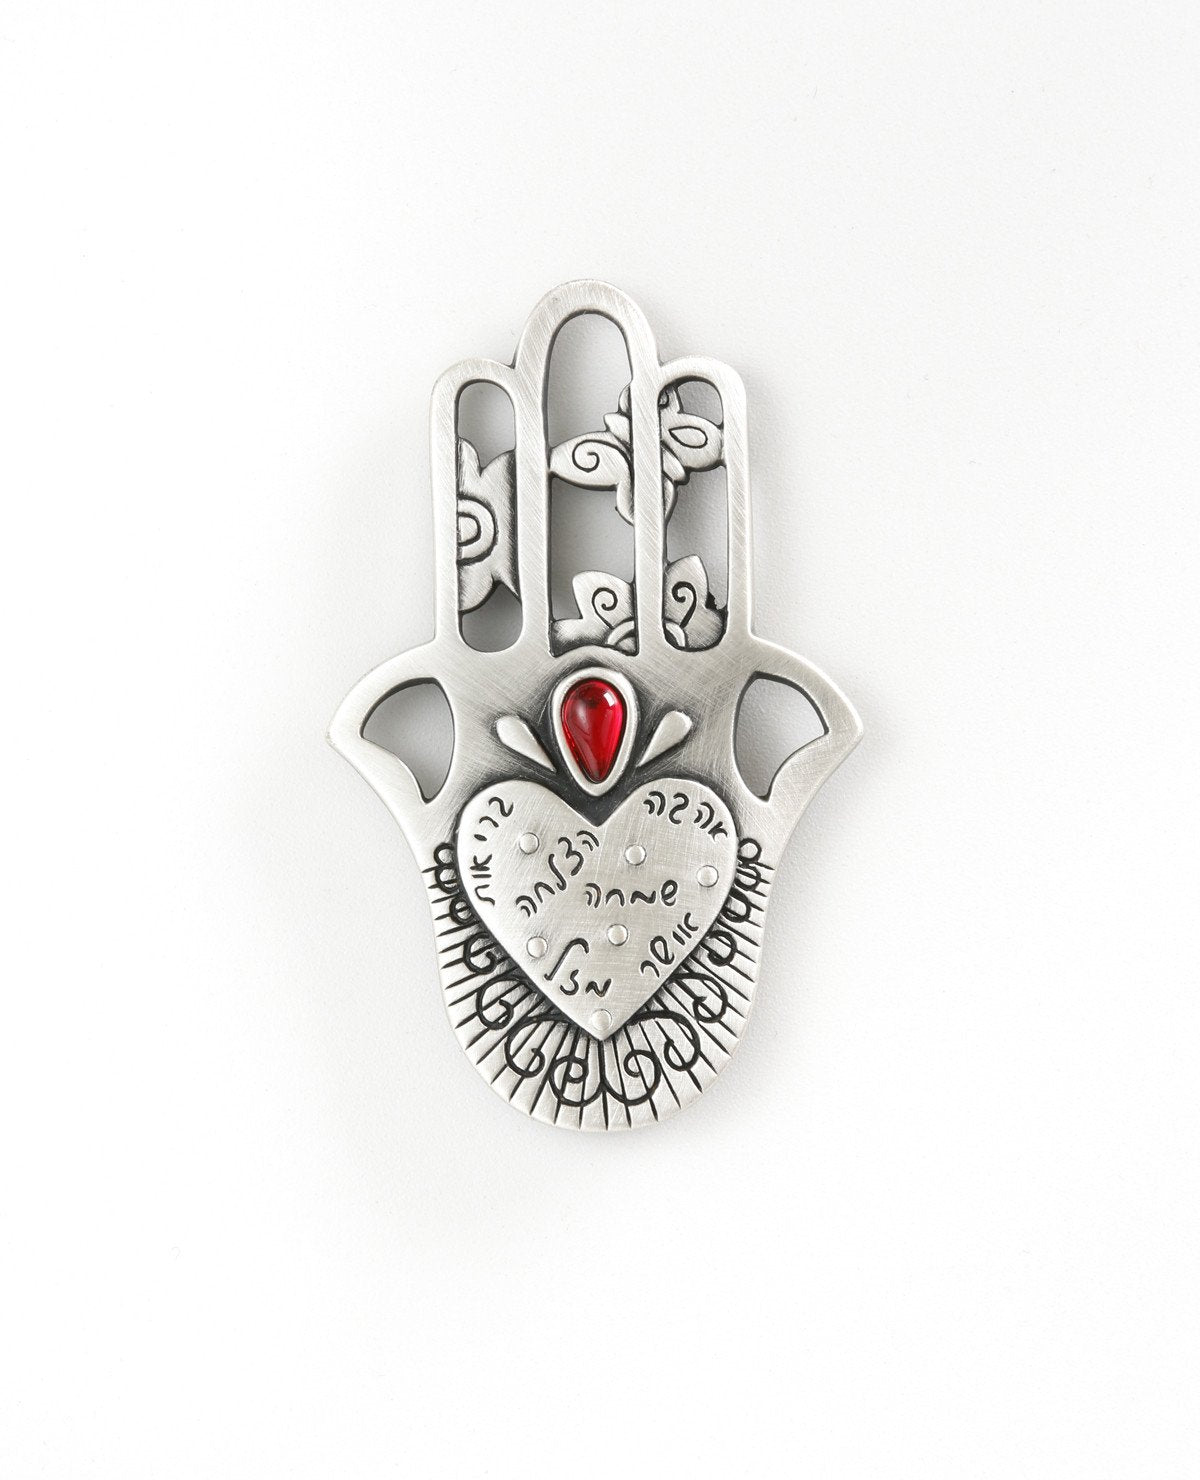 Hamsa shaped magnet with Swarovsky crystal and the 7 blessings.  Length: 7 cm  Width: 5 cm